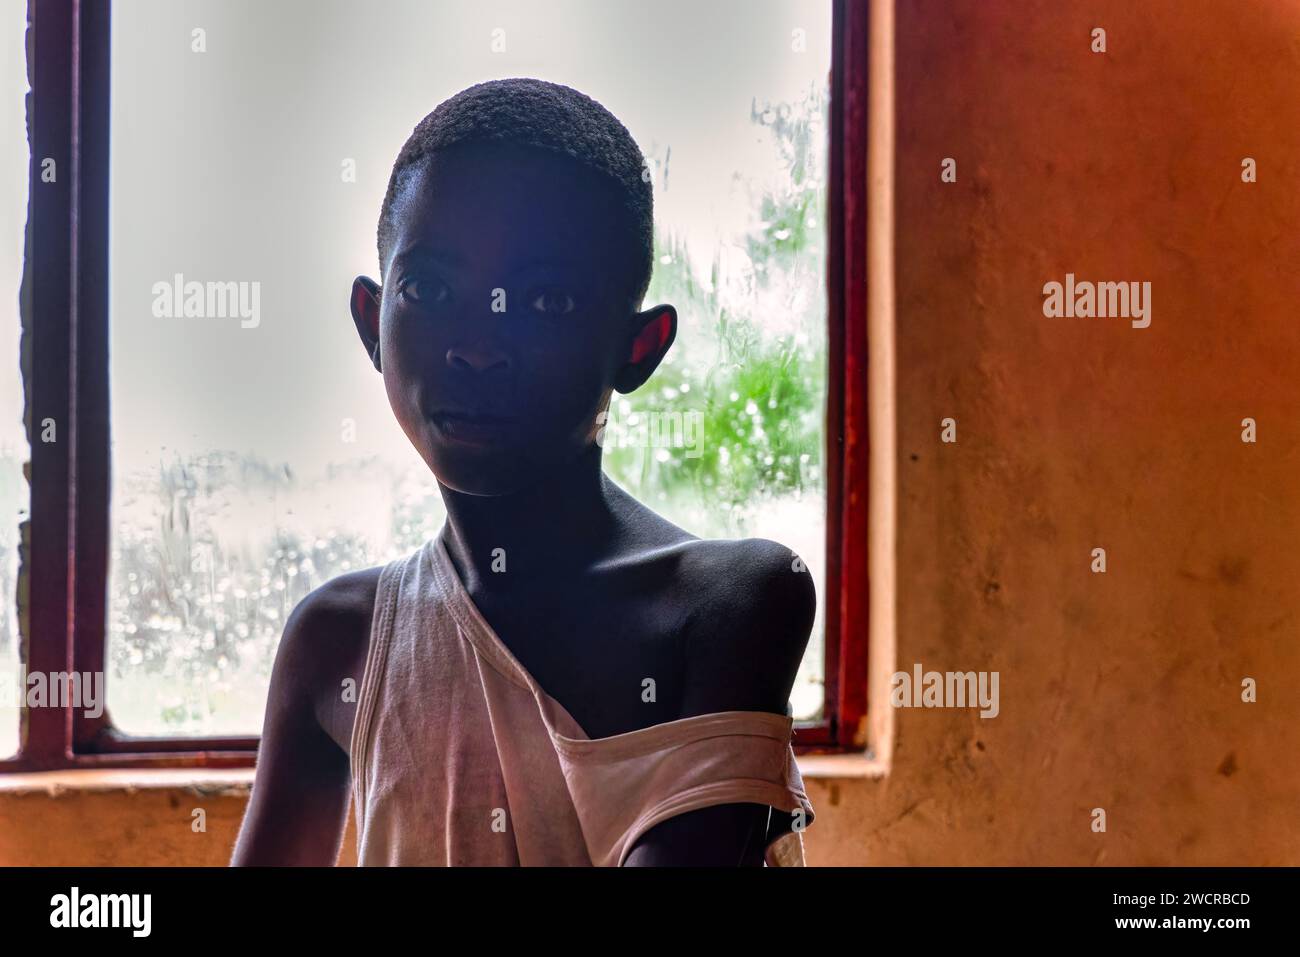 rainy day, girl standing by the window, thin body underweight, poverty in the favela Stock Photo